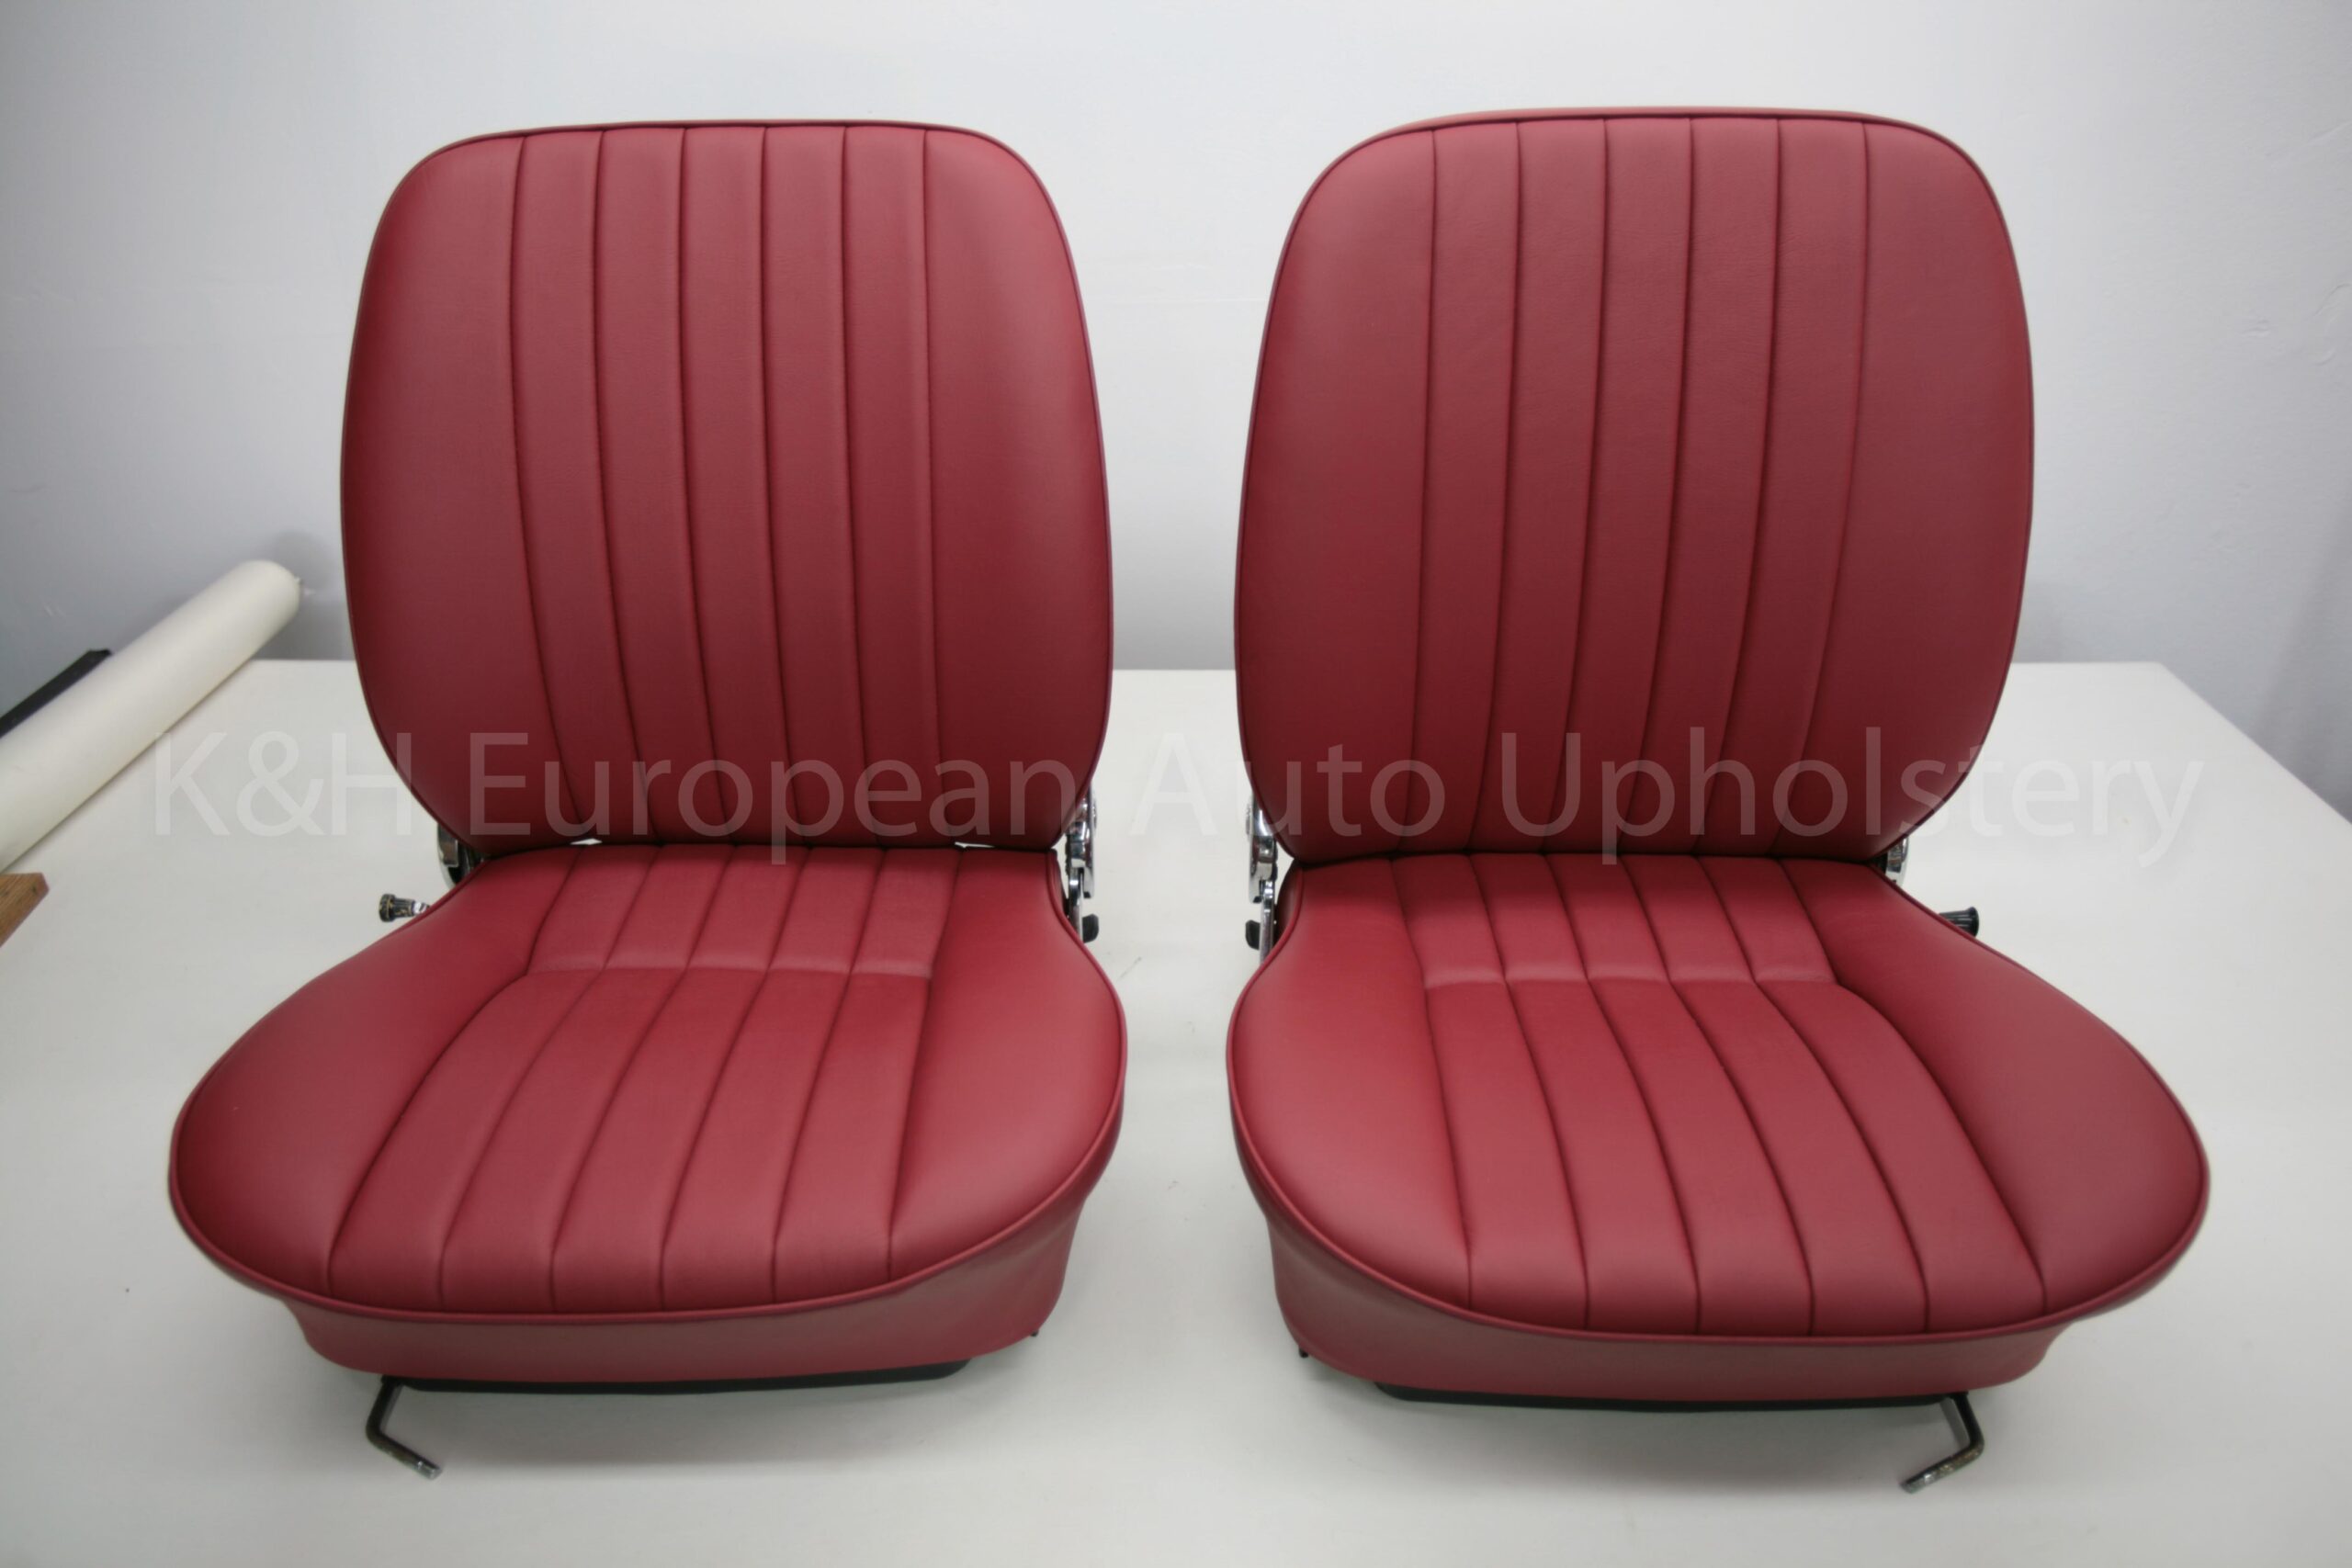 https://www.khupholstery.com/wp-content/uploads/2015/12/Porsche-356-Front-Seat-Cover-Red-21-scaled.jpg